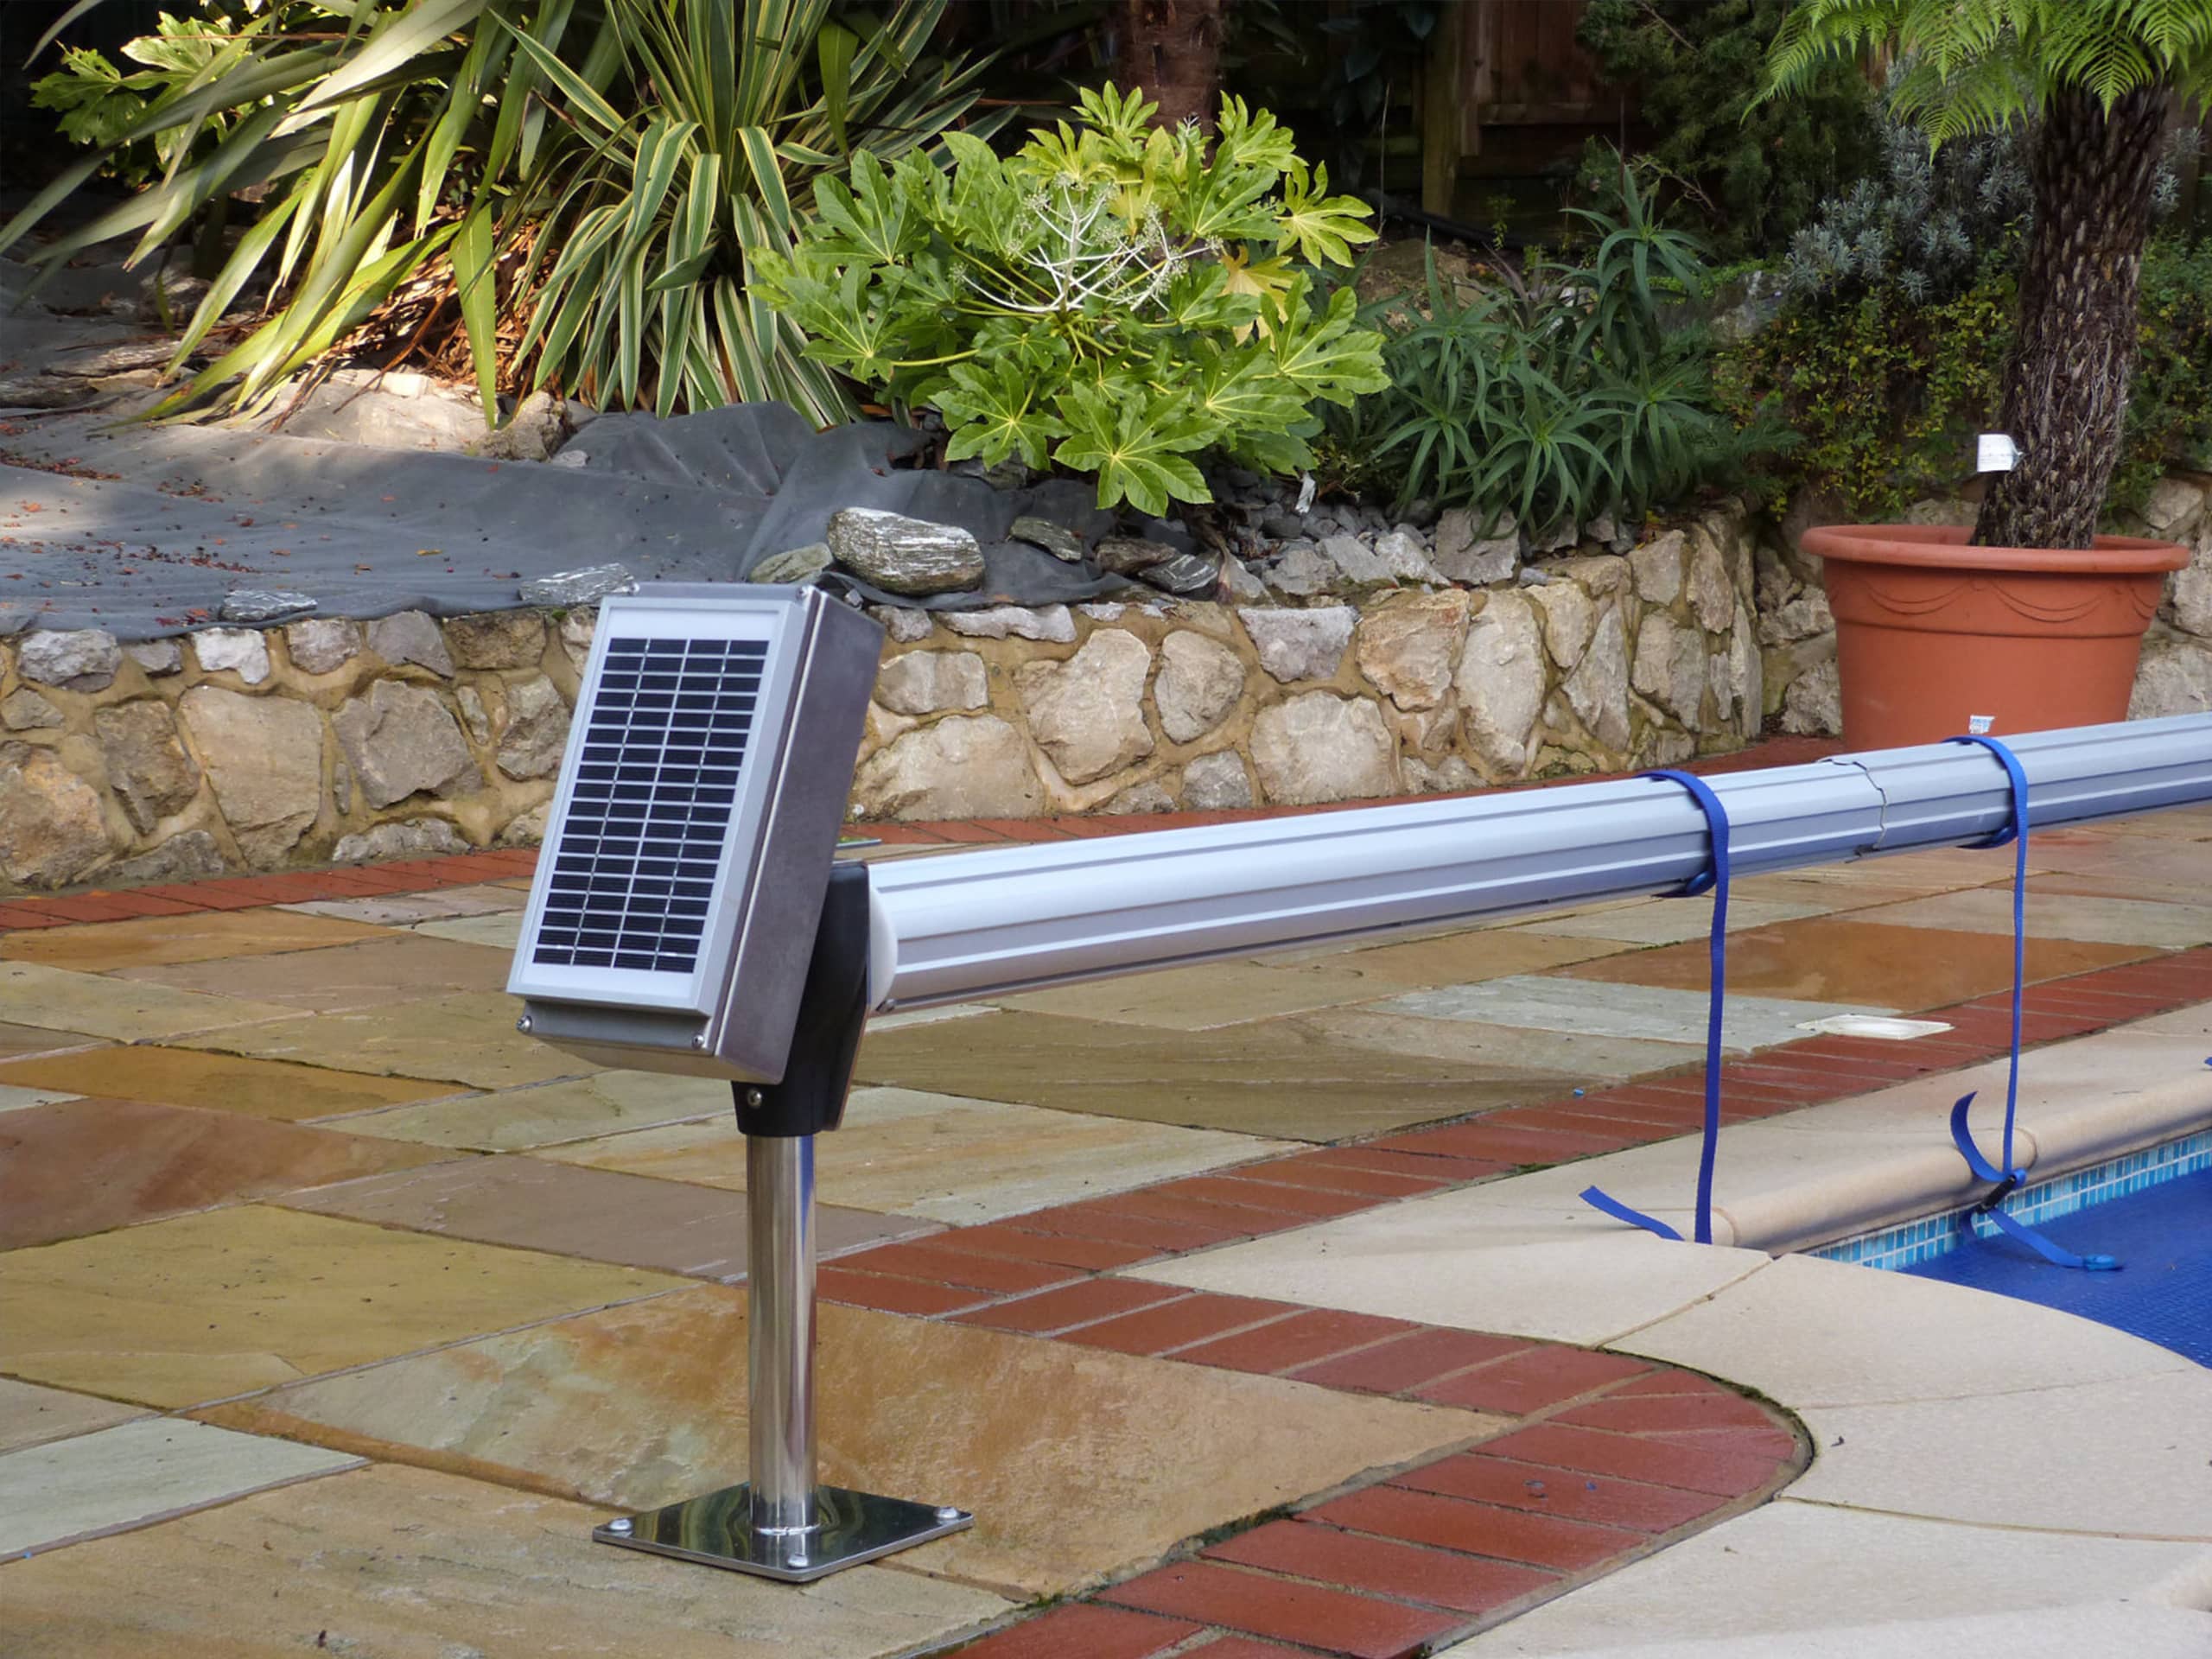 Image of the solar pool reel.